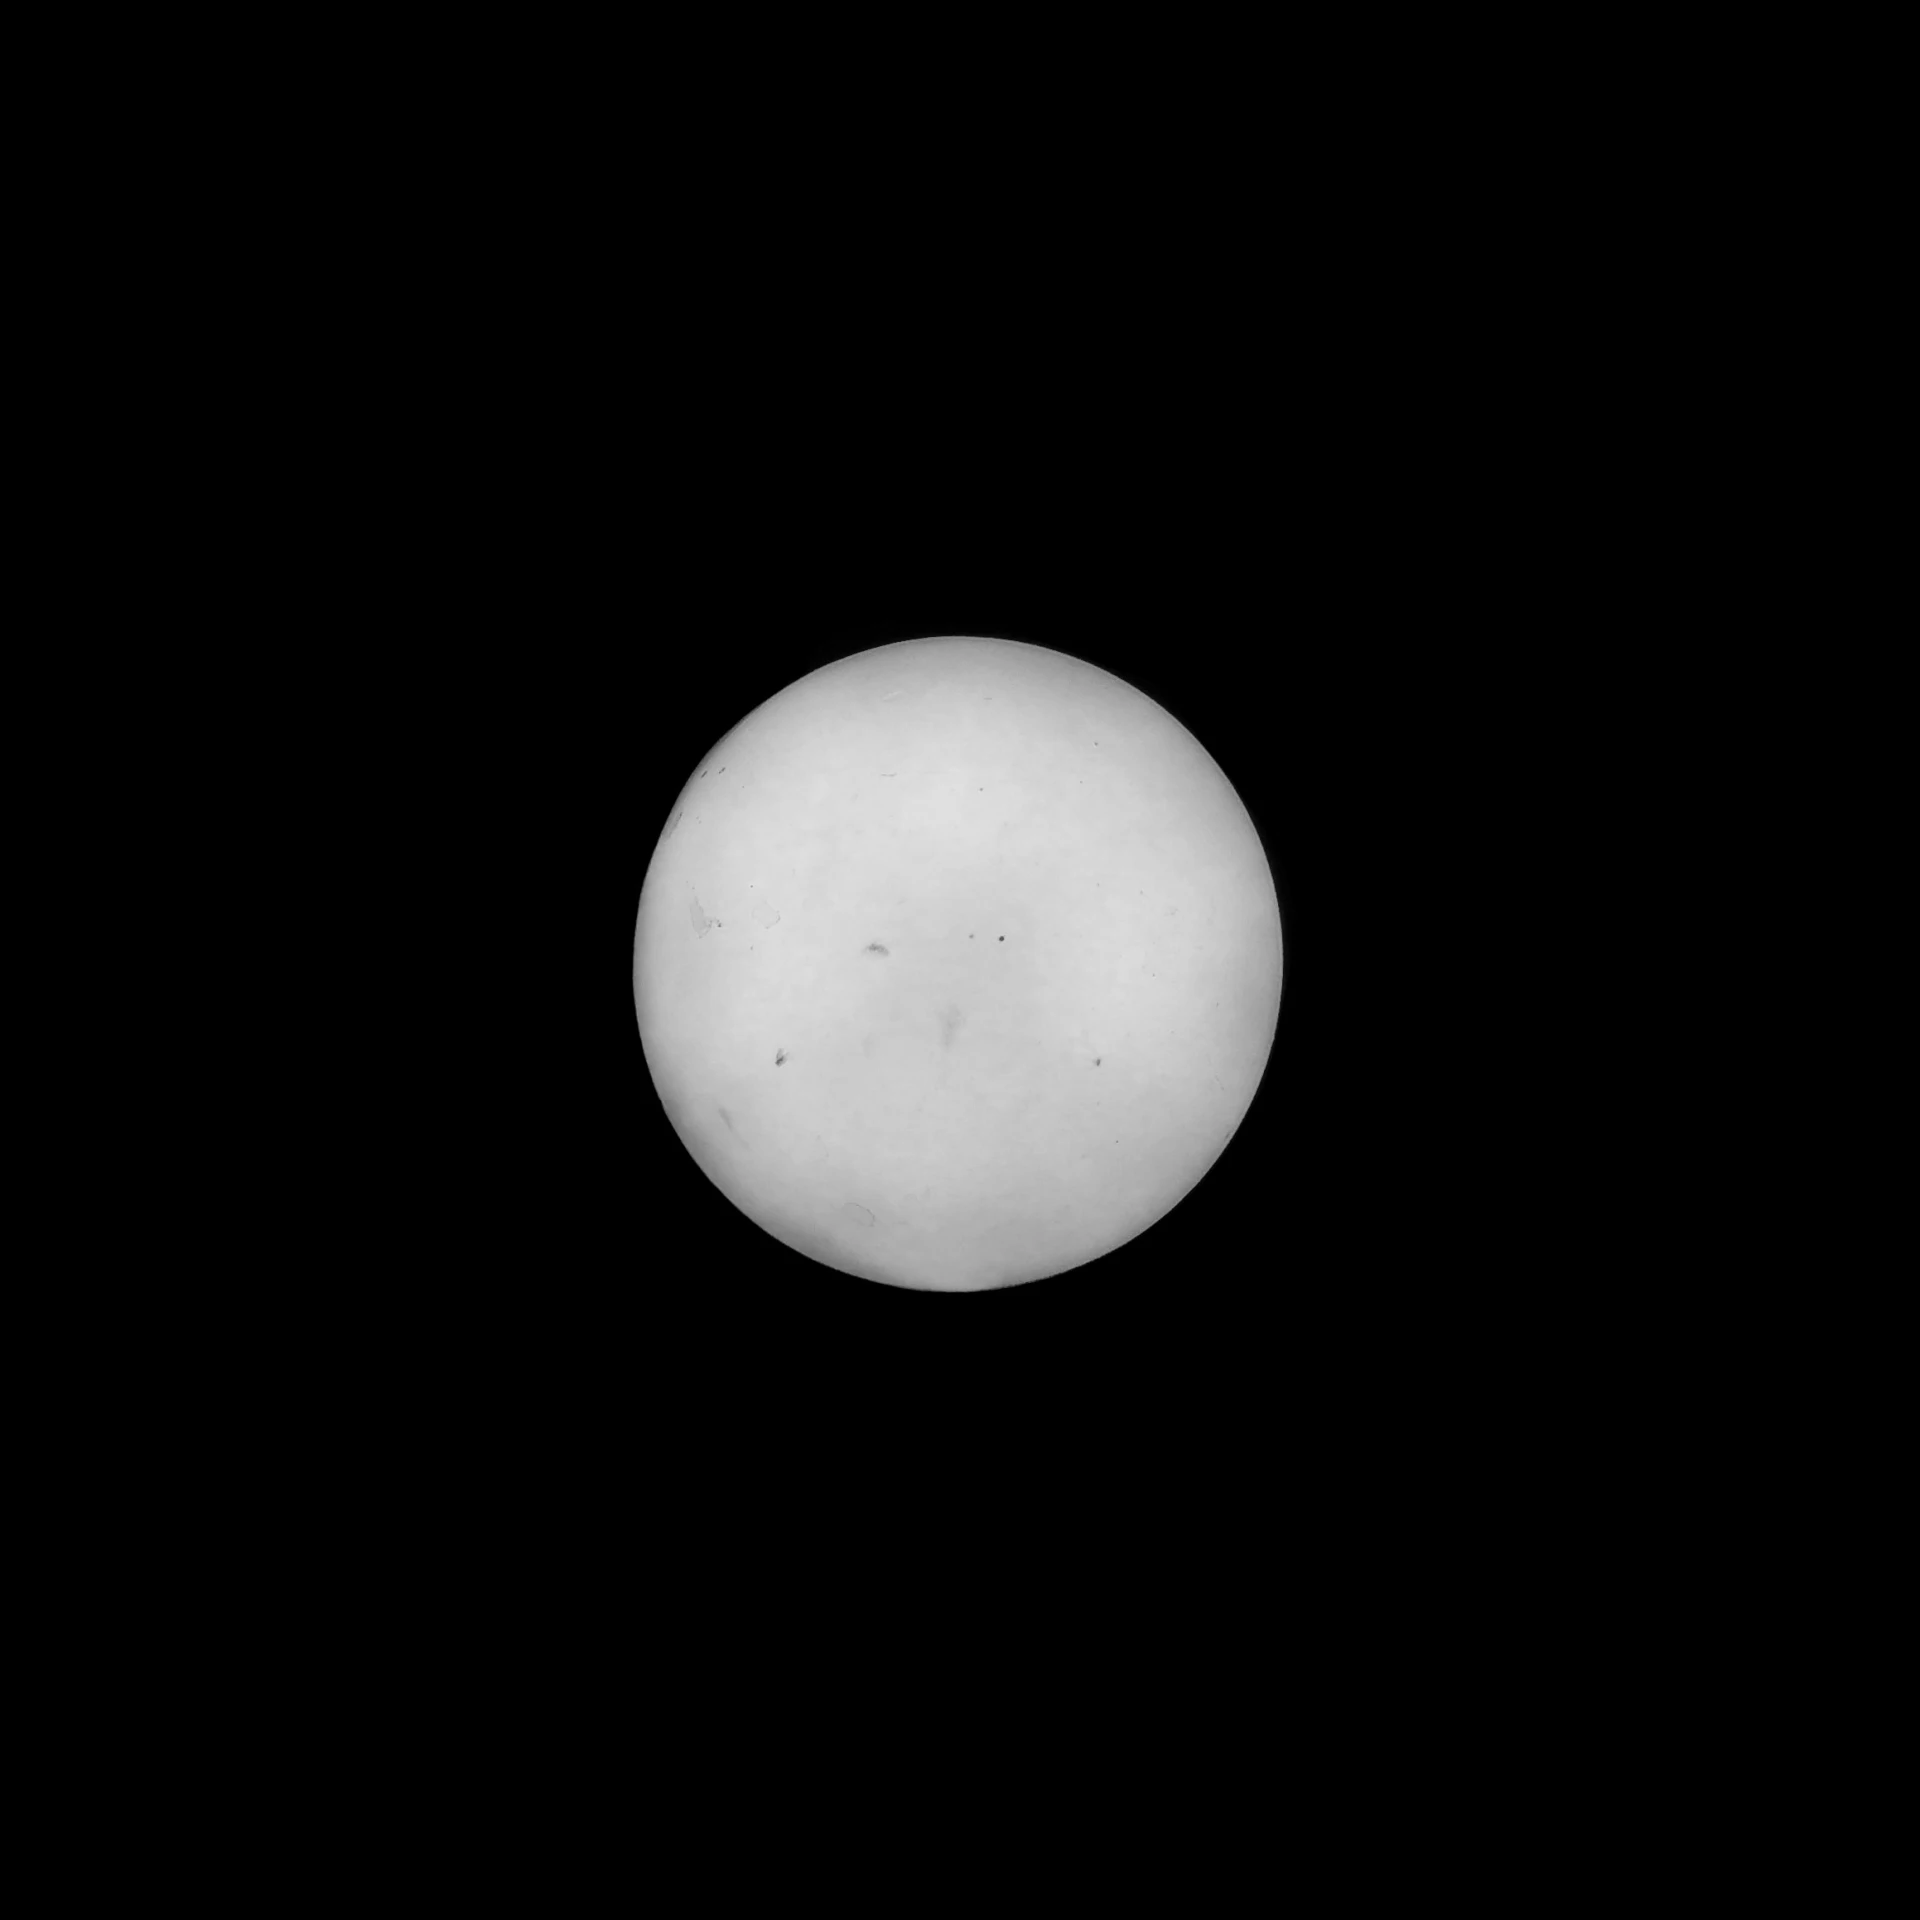 a black and white pograph of a distant object